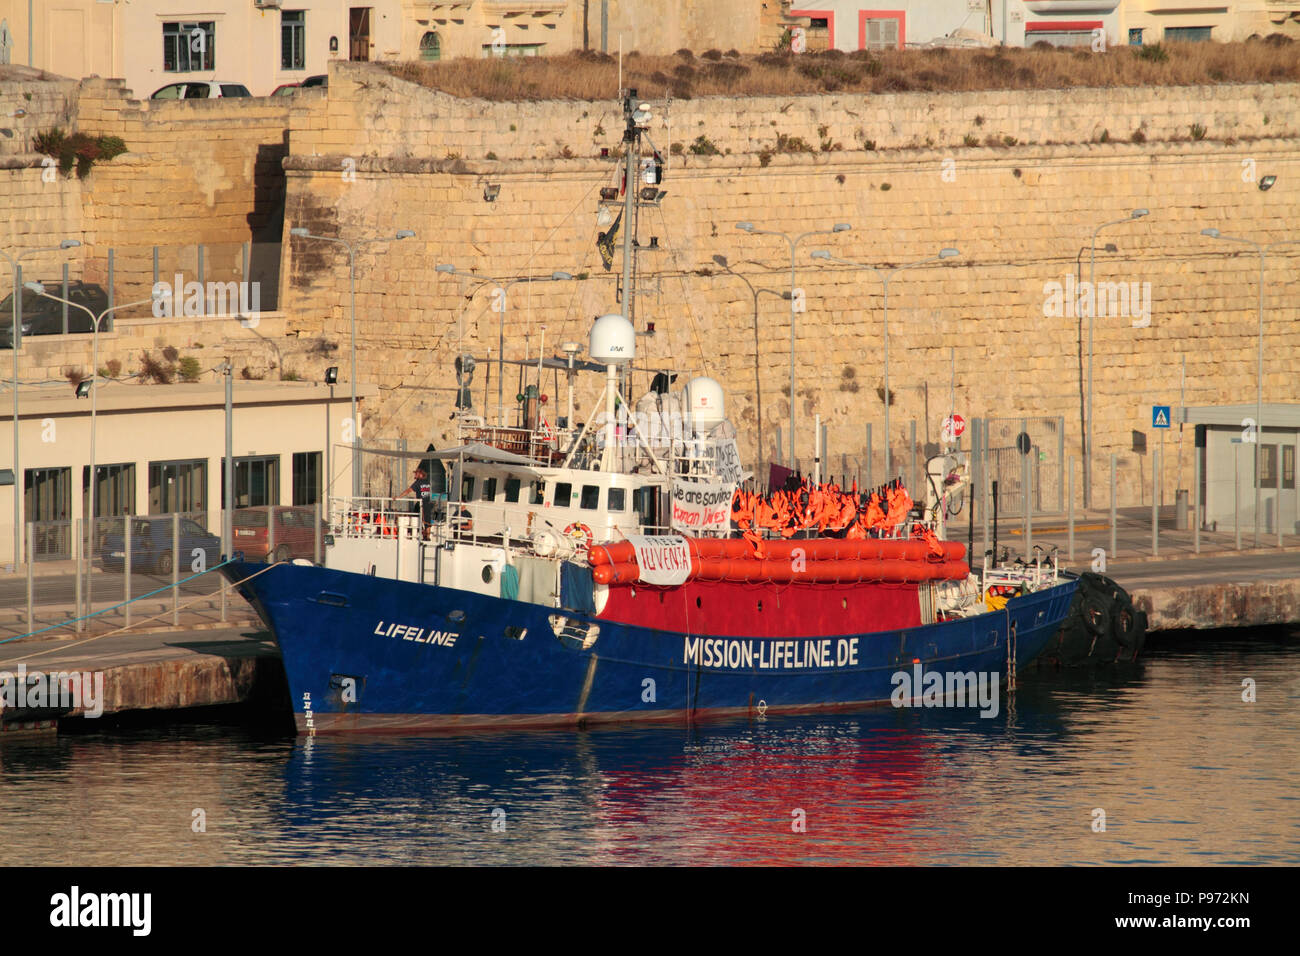 The rescue ship Lifeline, operated by the German NGO Mission Lifeline, in Malta. A poster on the side says 'Free Iuventa' - see explanation below. Stock Photo